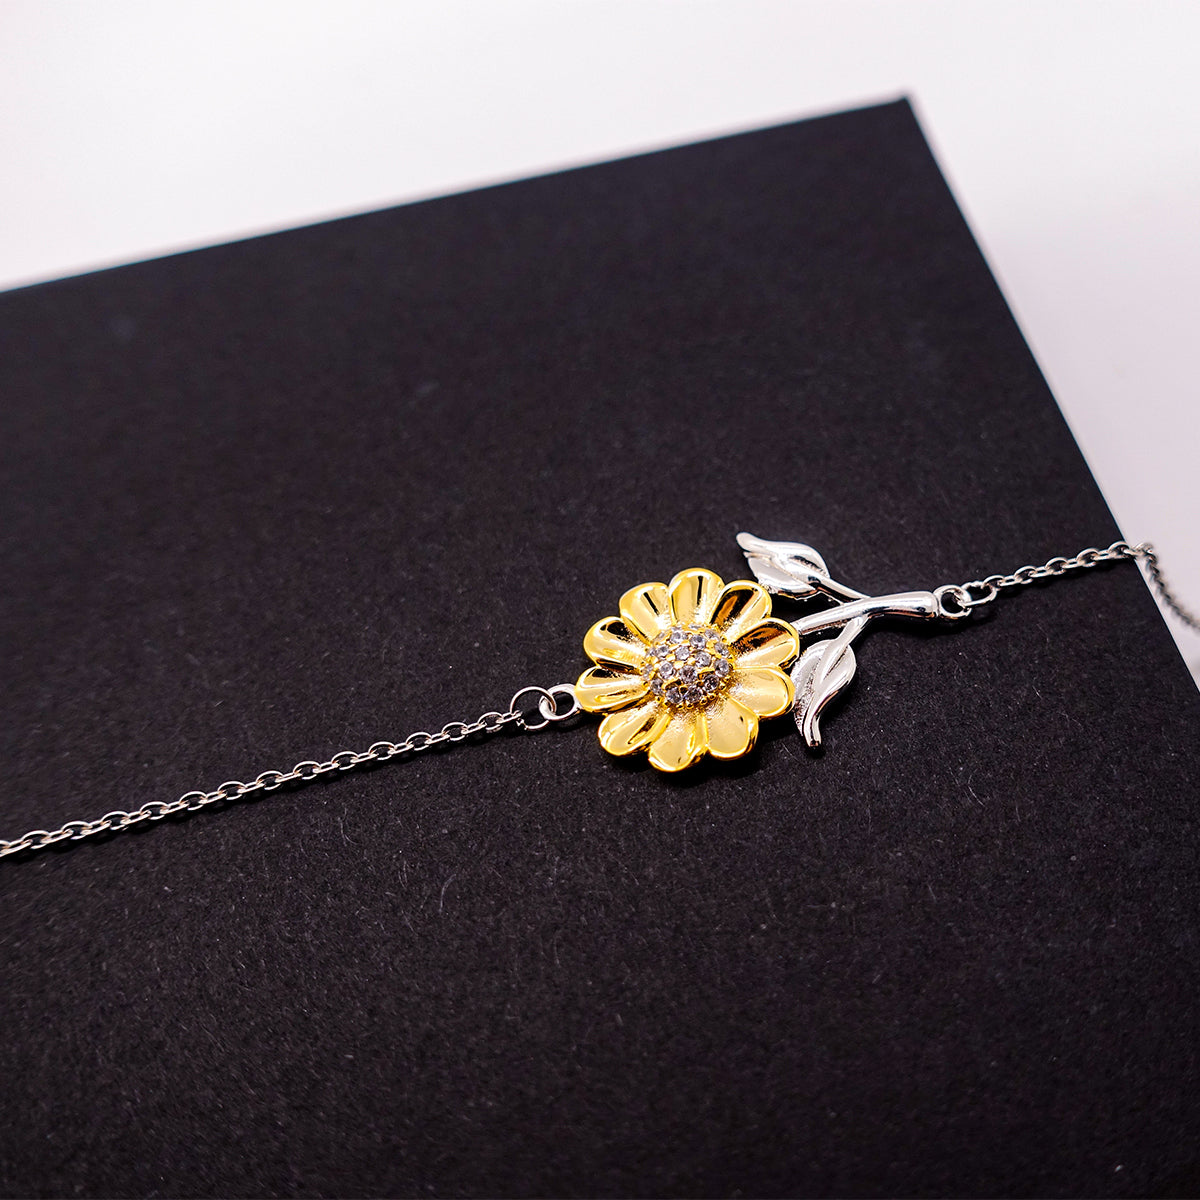 Grand Daddy Sunflower Bracelet - Engraved Memorial Gift for Him on Birthday or Christmas - Special Place in My Heart, Always